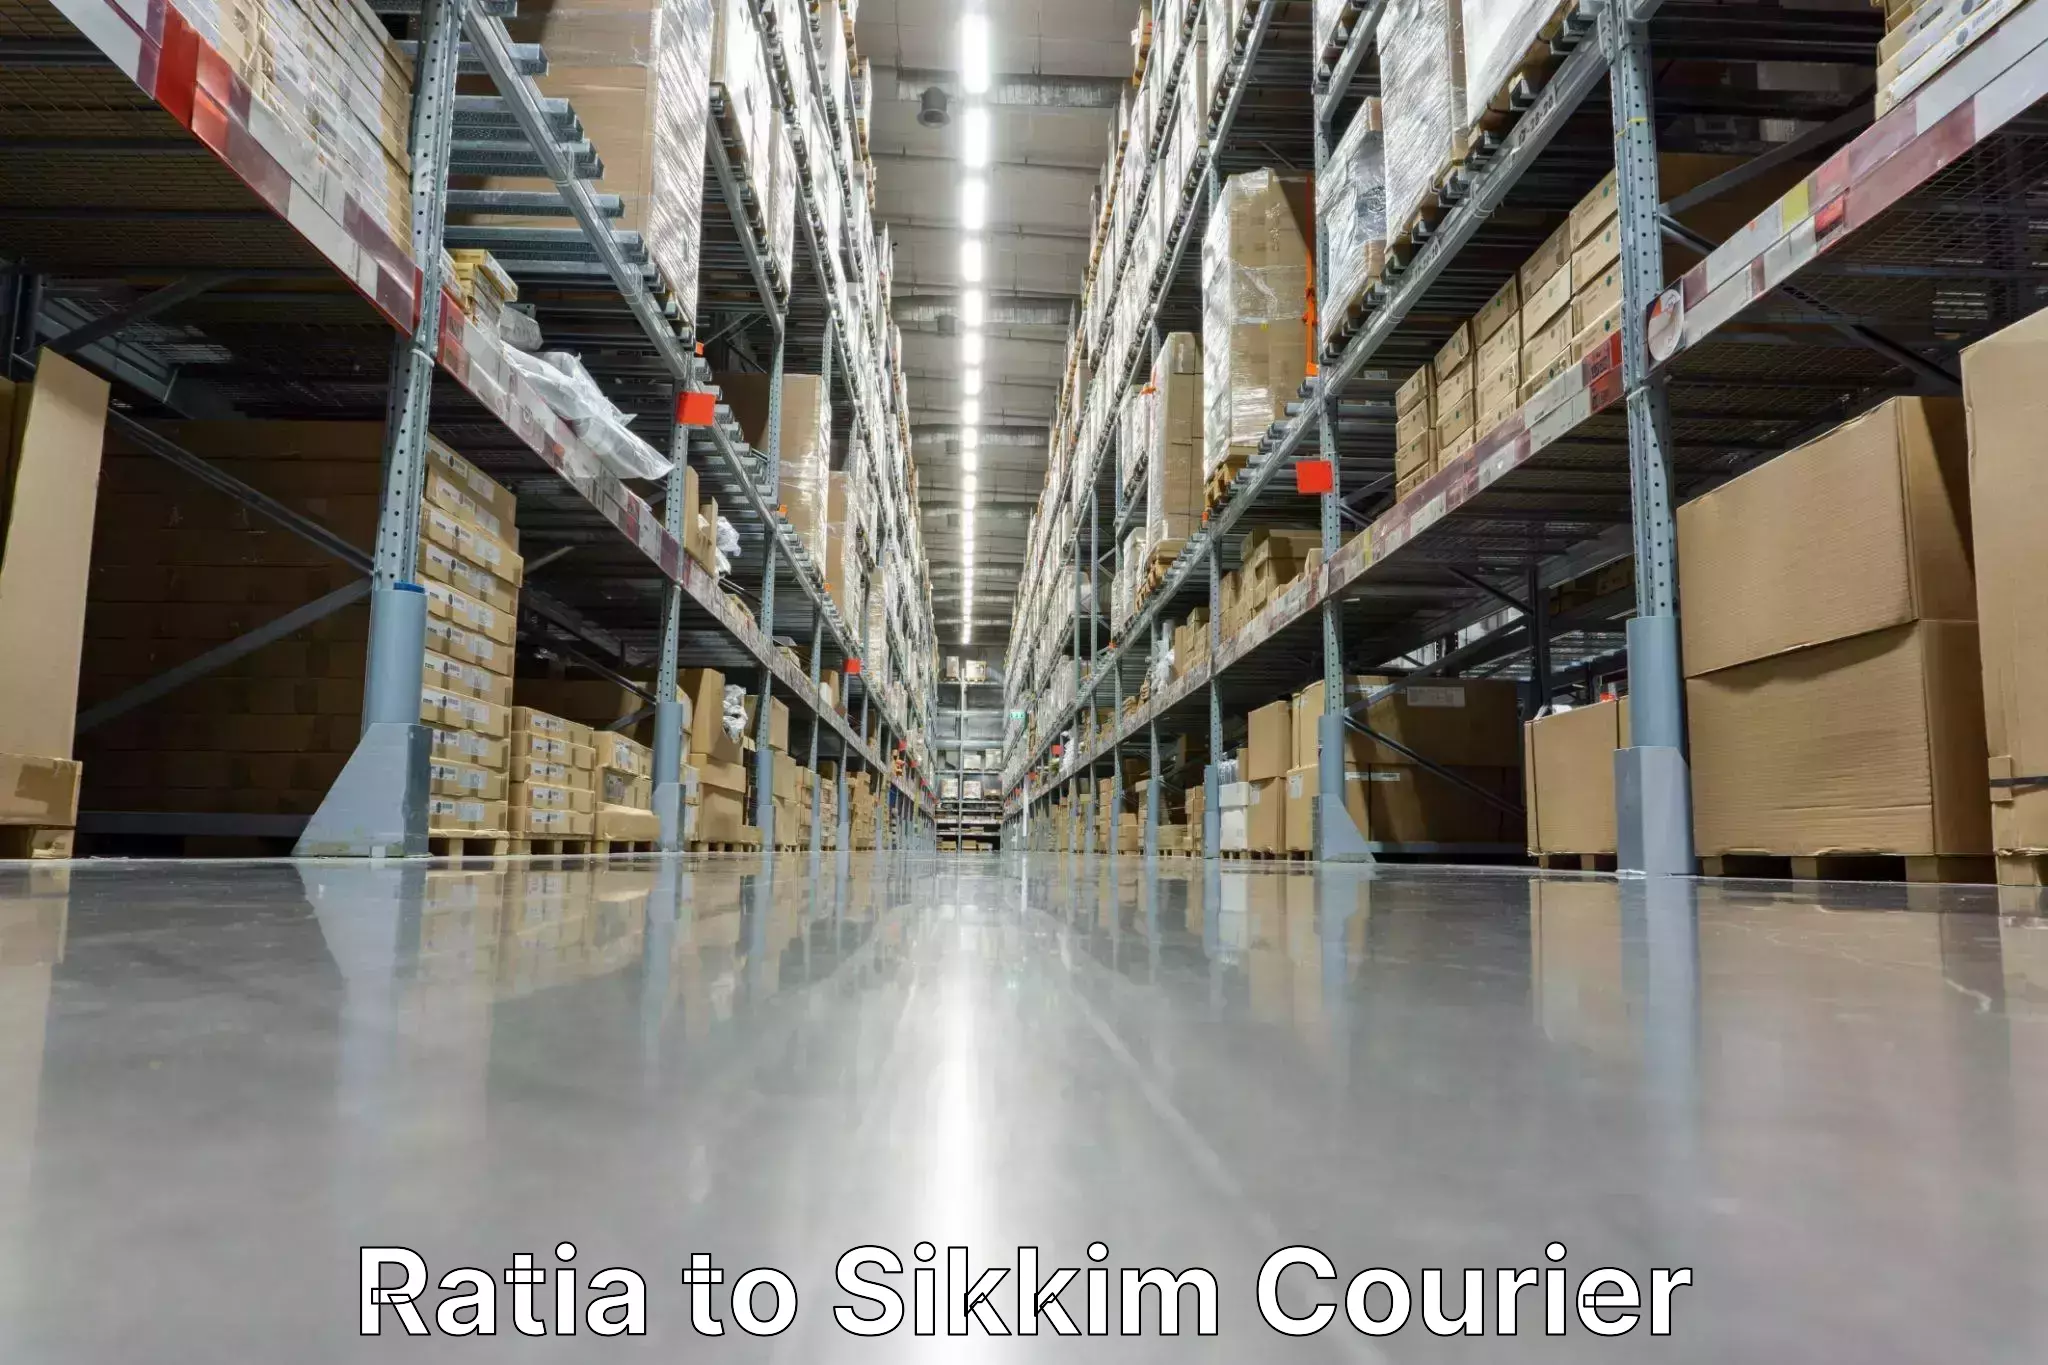 Advanced shipping technology Ratia to East Sikkim